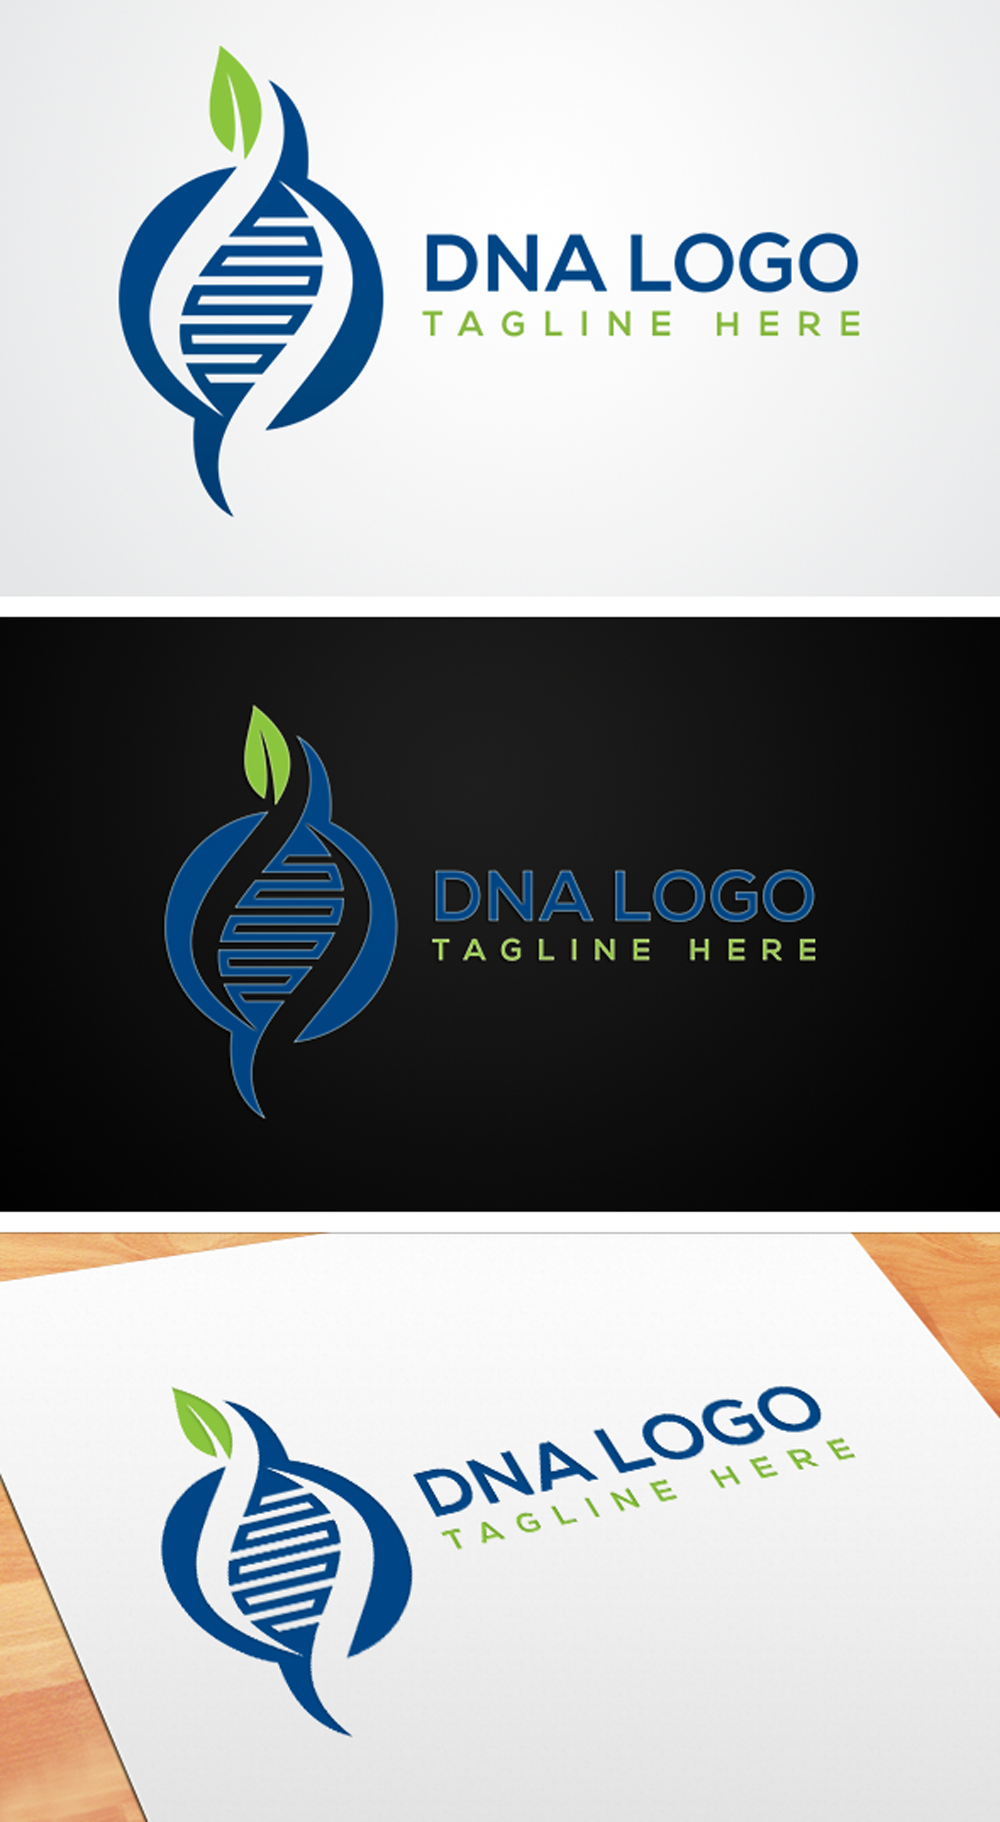 A pack of images of amazing logos in the form of a DNA shape.